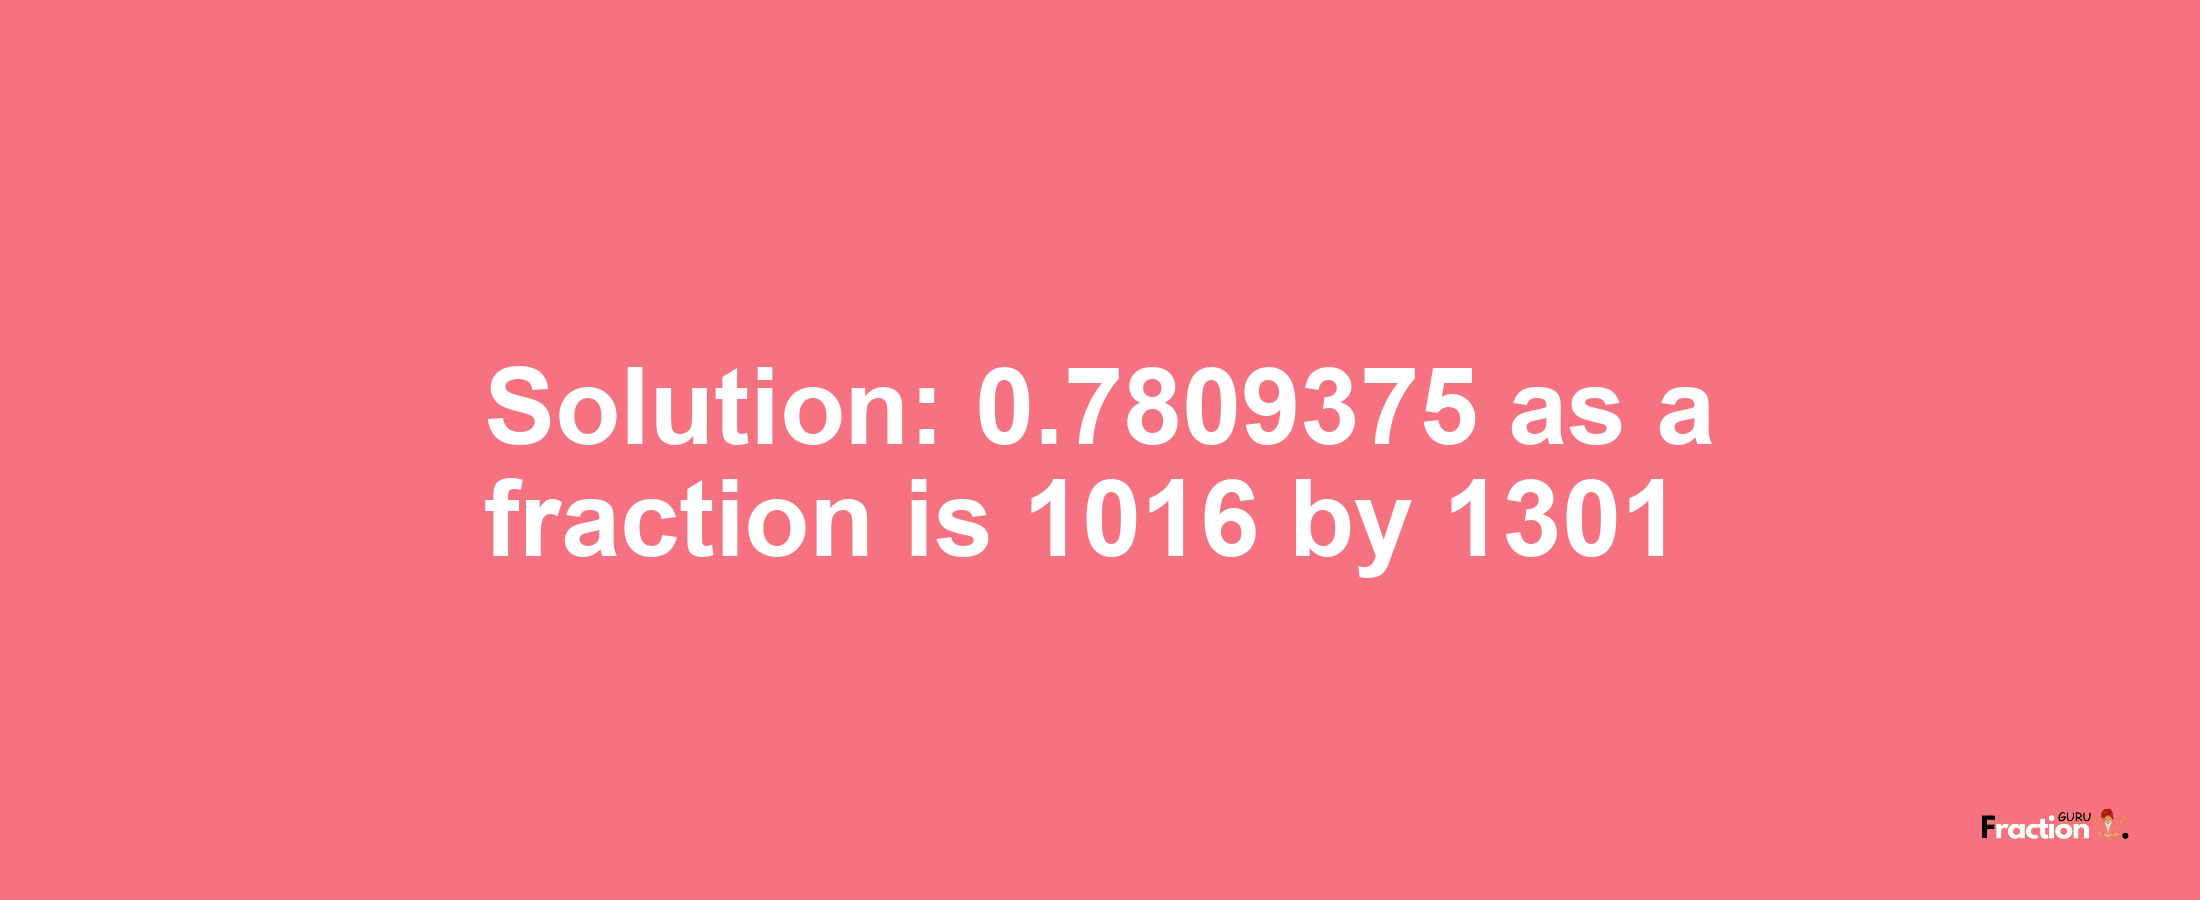 Solution:0.7809375 as a fraction is 1016/1301